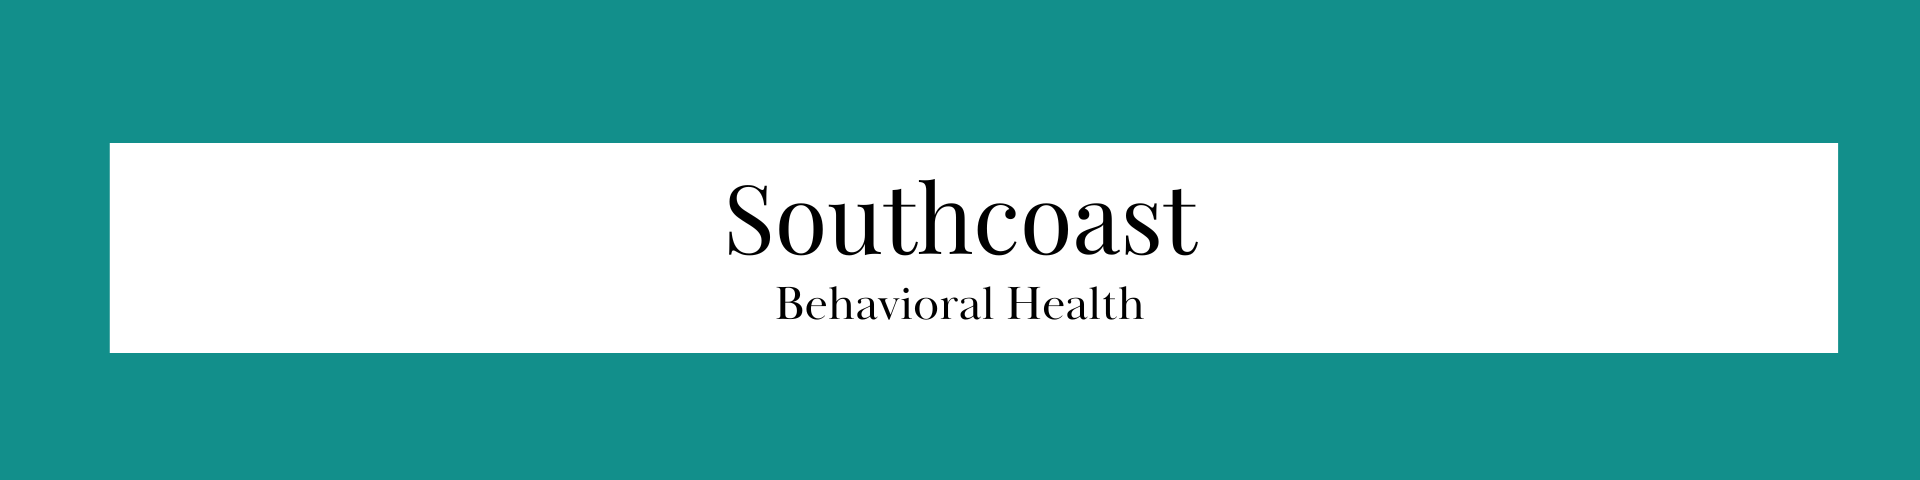 Southcoast Behavioral Health Resources (Link)